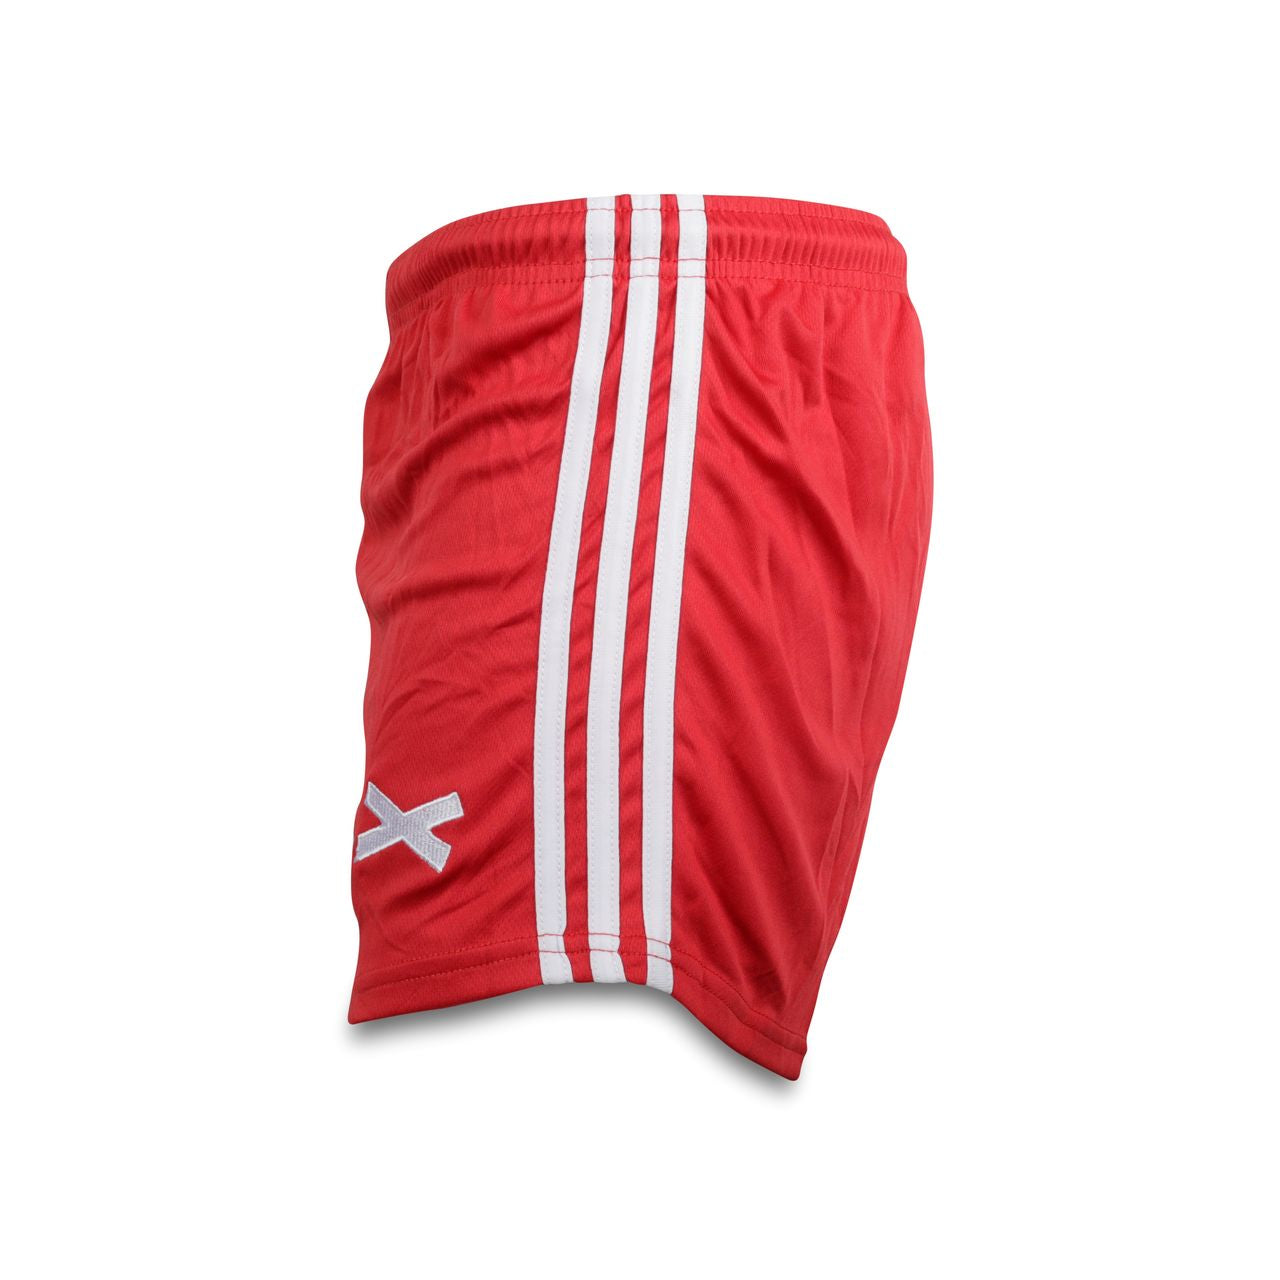 GAA Shorts Red with White Stripes Gaelic Games Sportswear